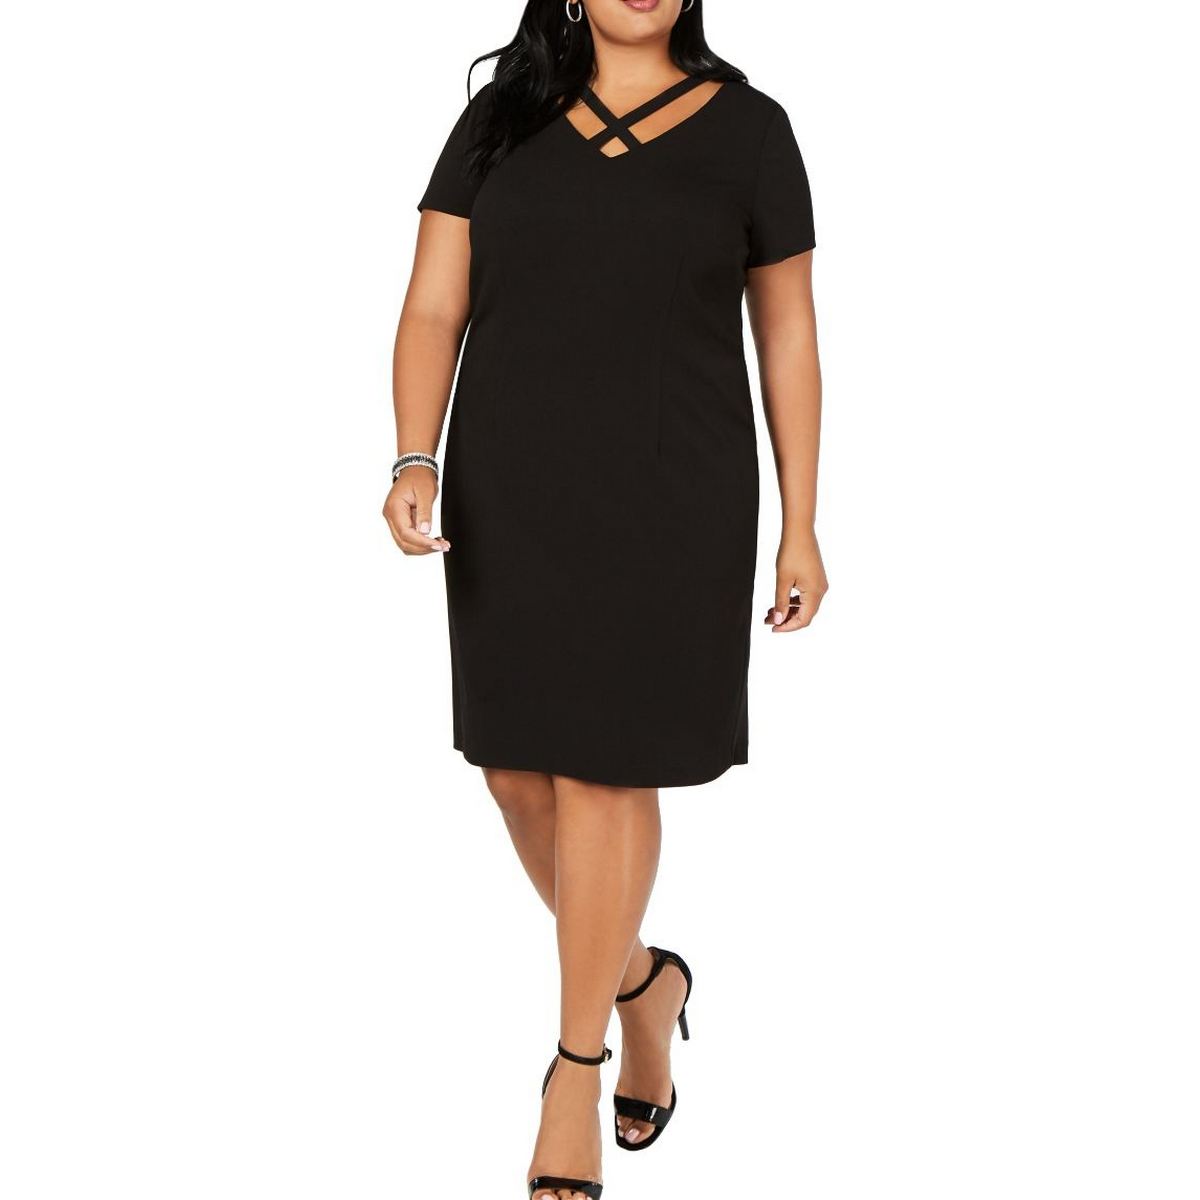 Connected Apparel Womens Black Crepe Wear to Work Dress Plus 18w BHFO ...